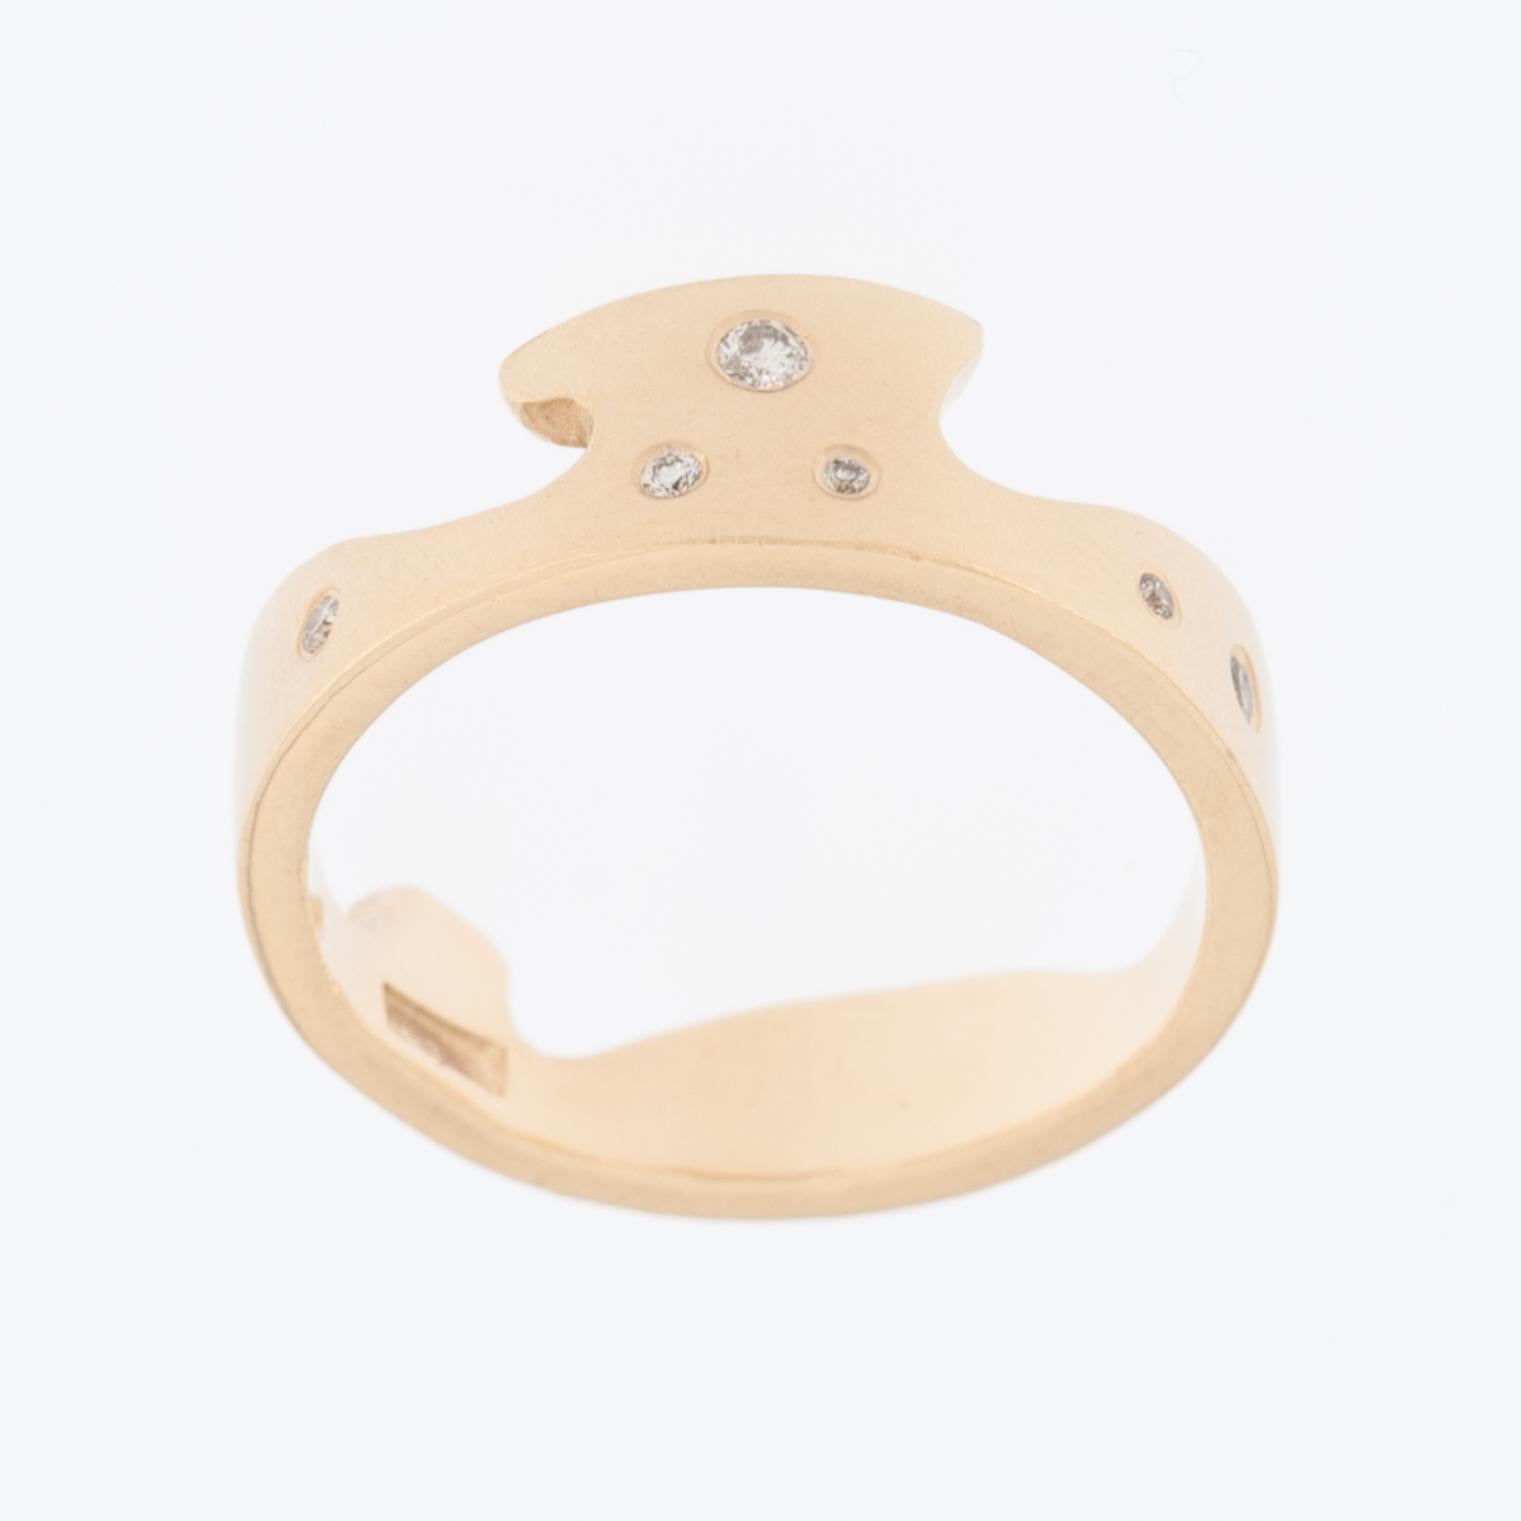 The Crown Ring 18kt Yellow Gold with Diamonds is a luxurious and exquisite piece of jewelry. 

The ring is crafted from 18kt yellow gold, which is known for its rich and warm color, making it a popular choice for fine jewelry.

The ring features a